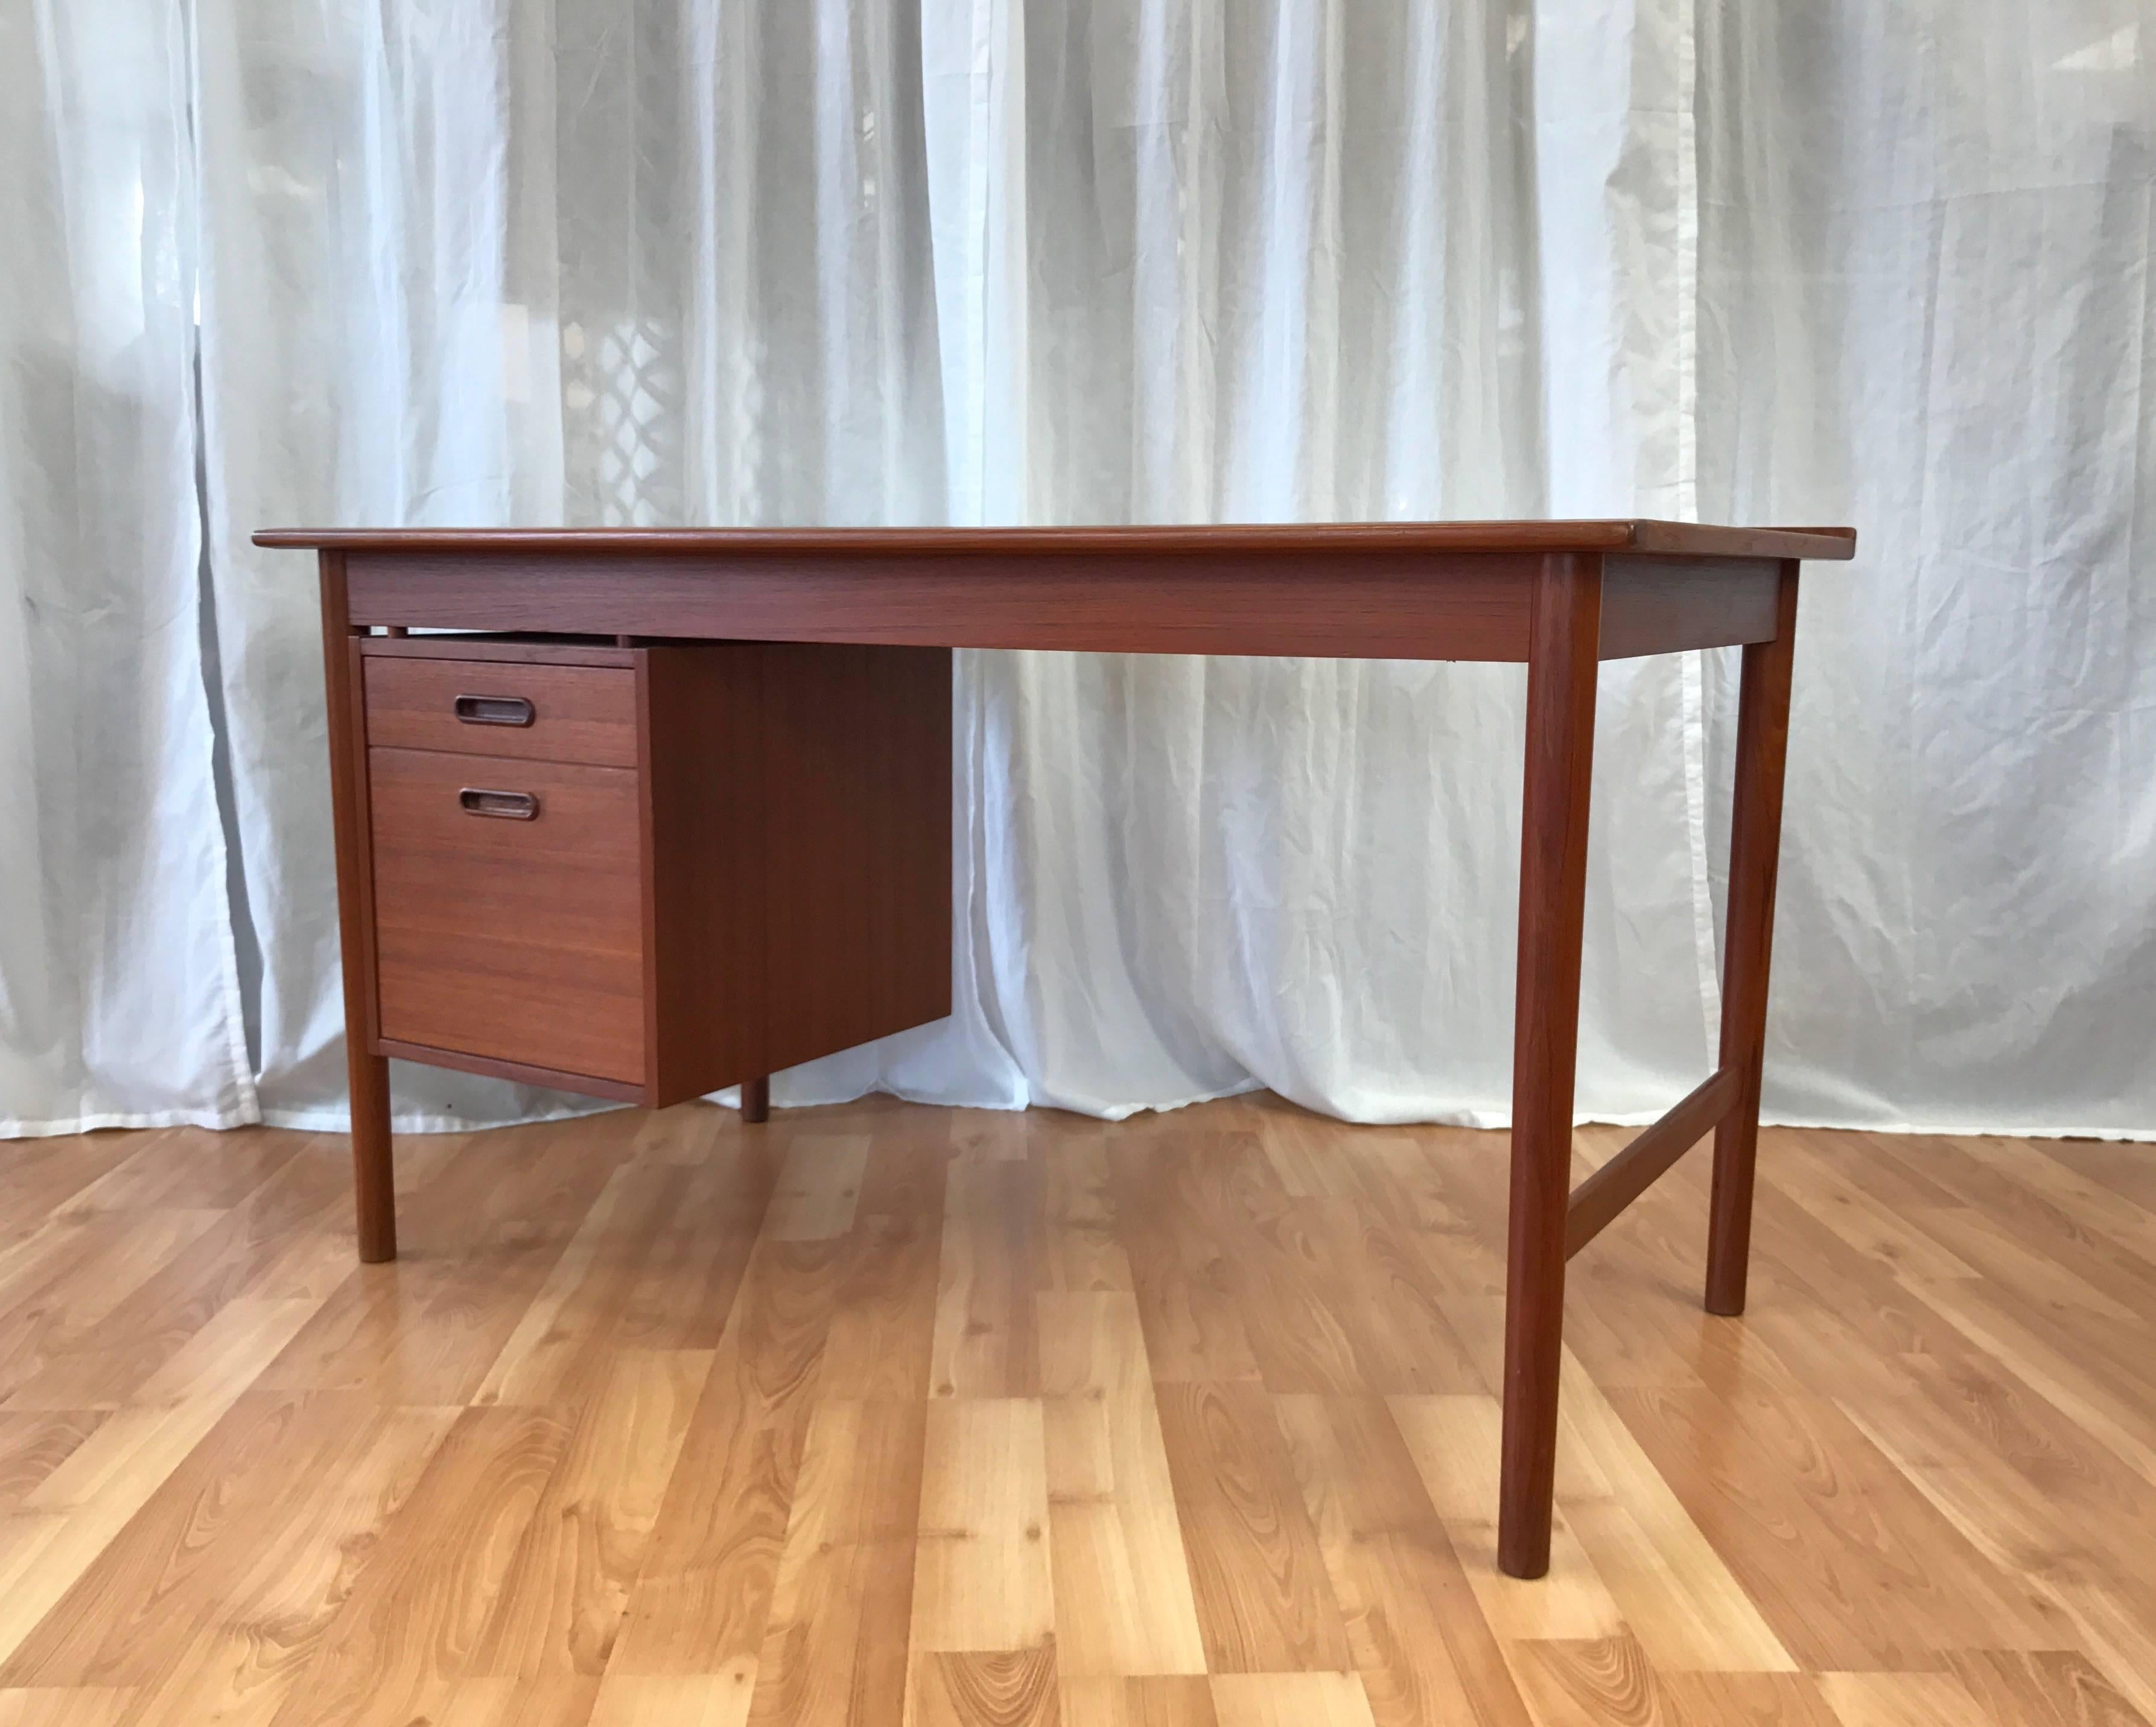 A Danish Modern “Model 541” teak writing desk by Folke Ohlsson for DUX.

Clean-lined floating cabinet holds two drawers with solid teak recessed pulls. Bottom drawer features carved tracks for easily hanging file folders. Back lip and tapered